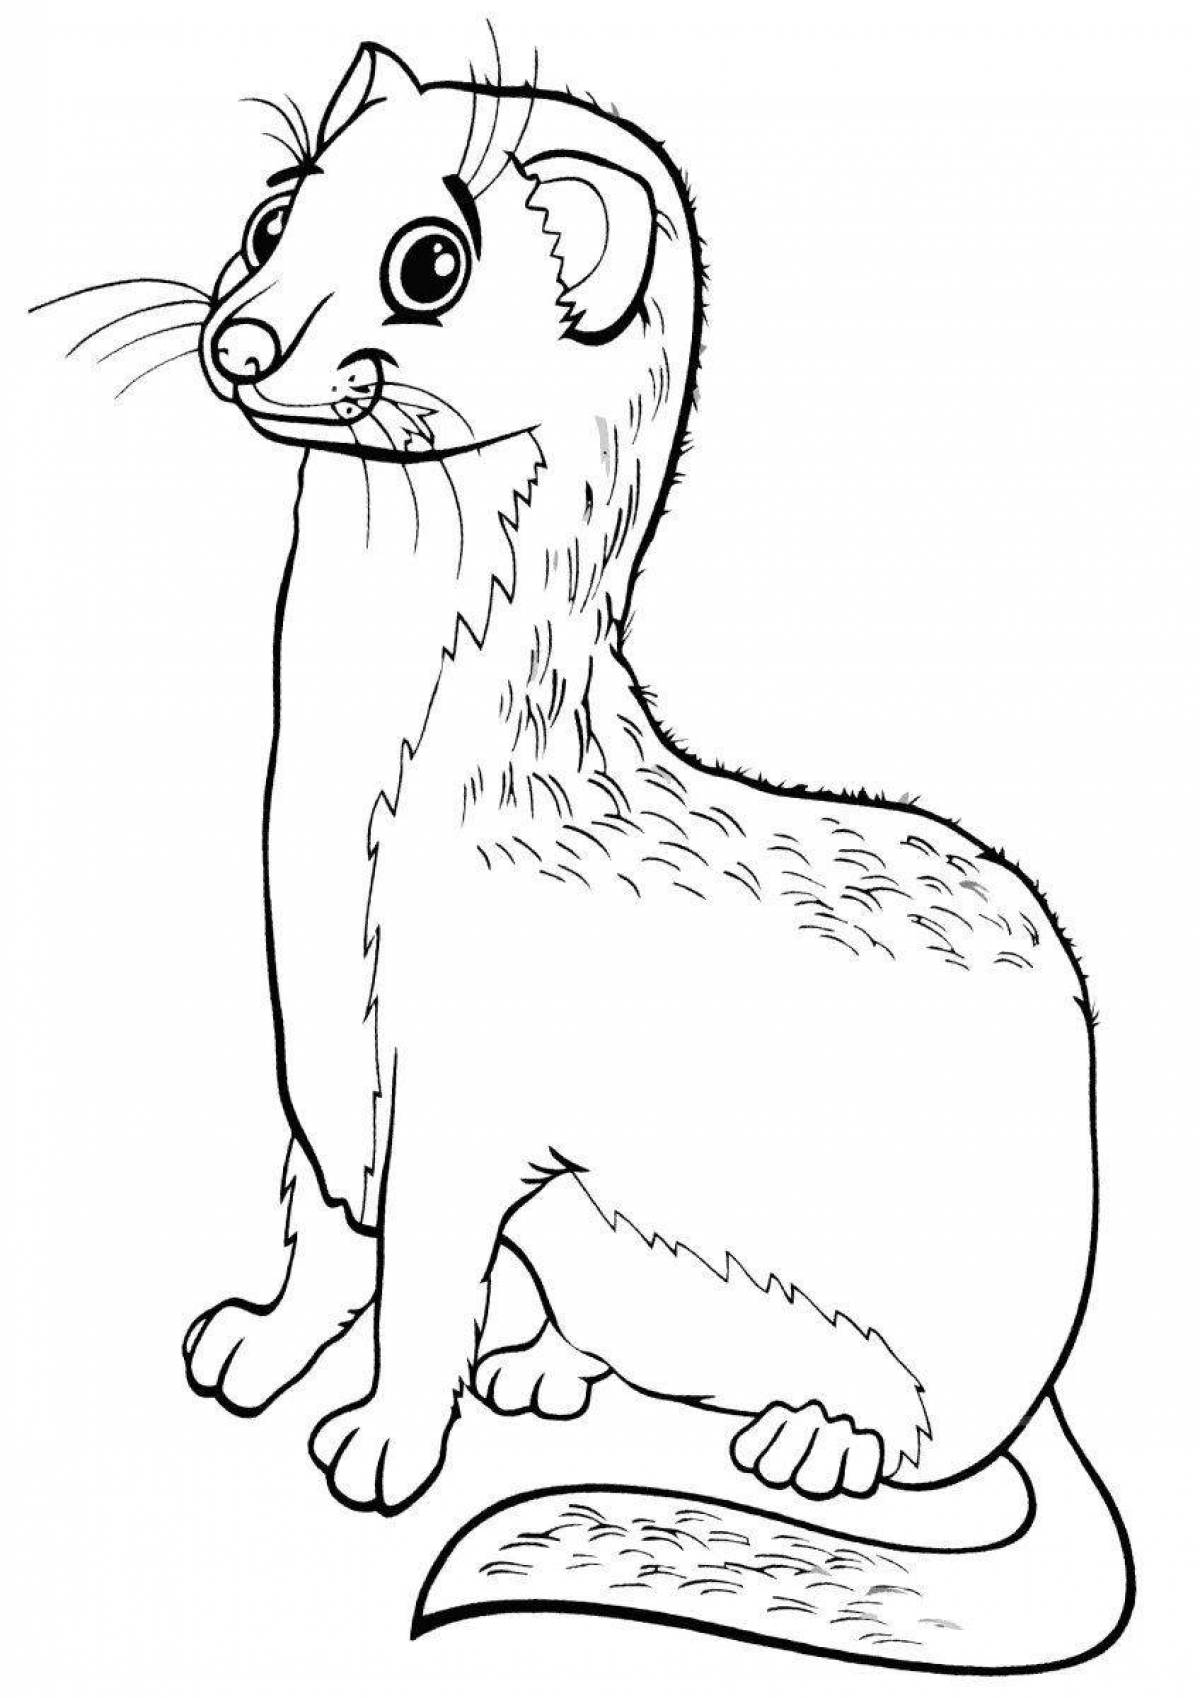 Cute ferret coloring pages for kids